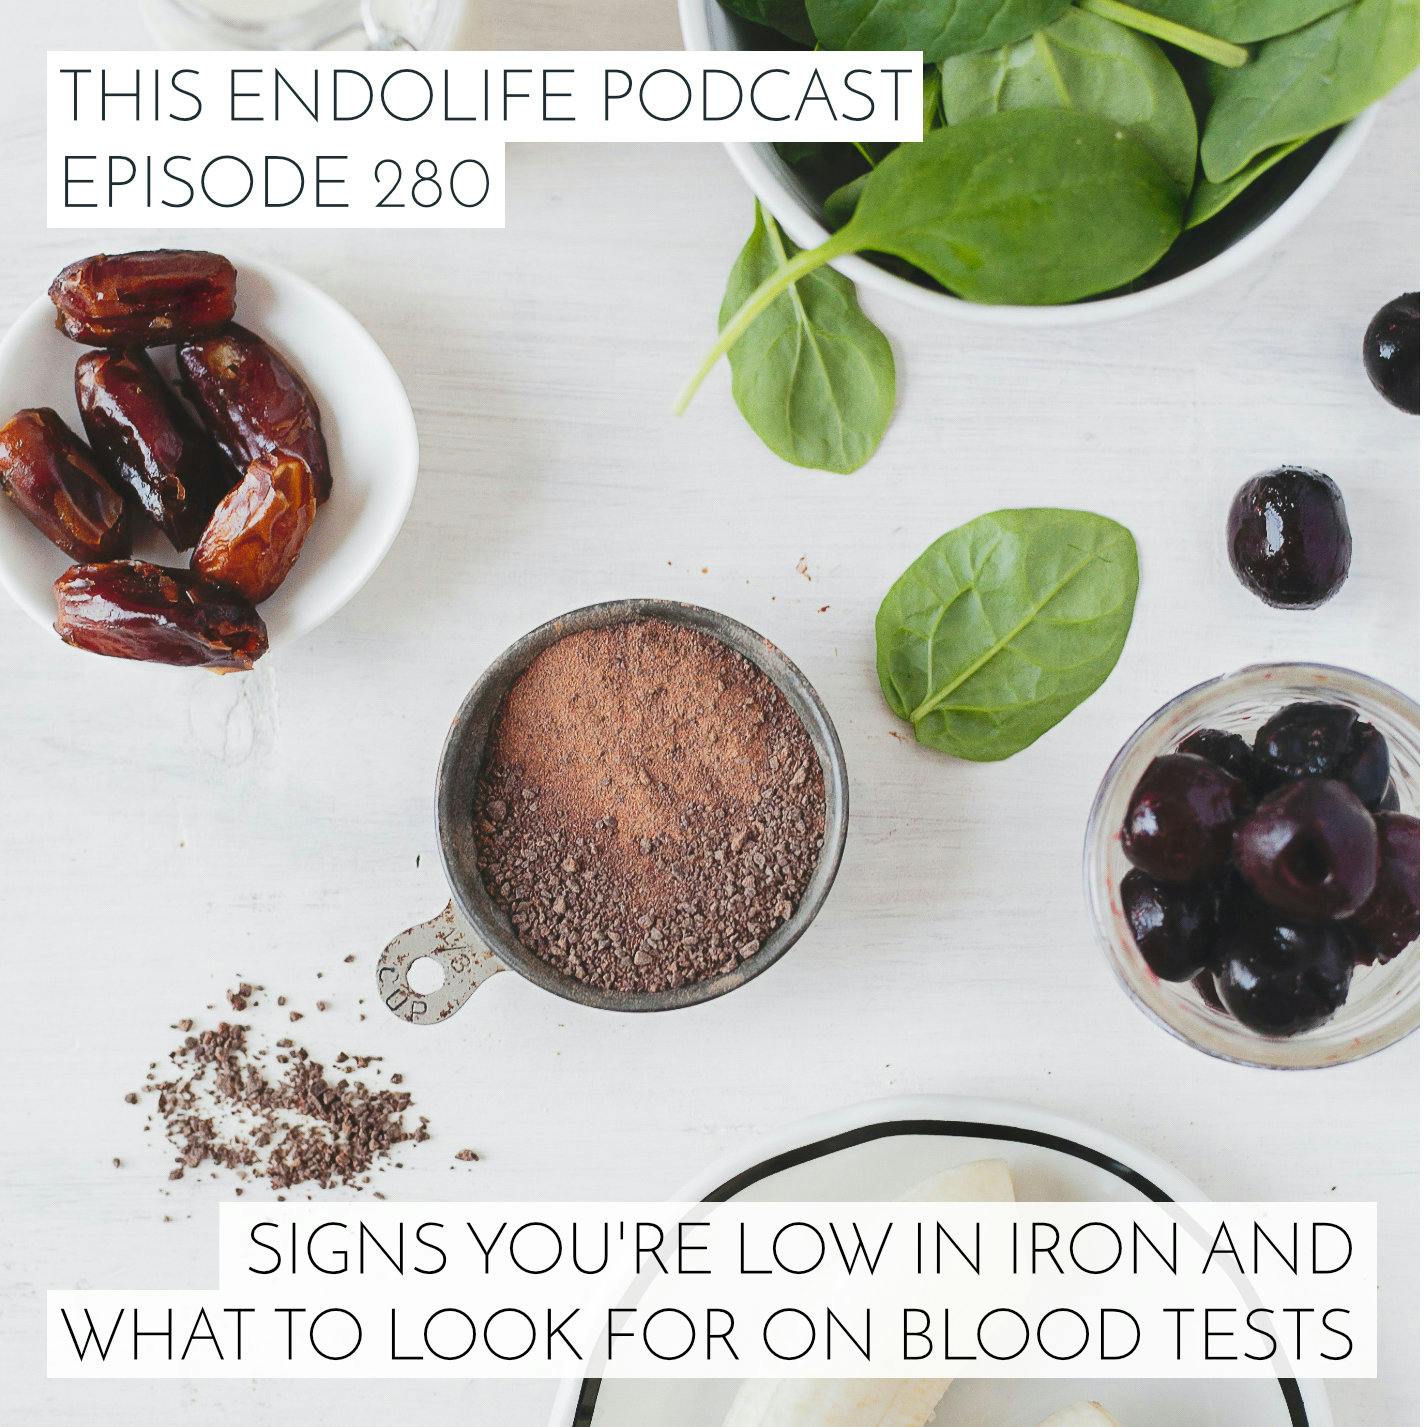 Signs You’re Low in Iron and What to Look For on Blood Tests